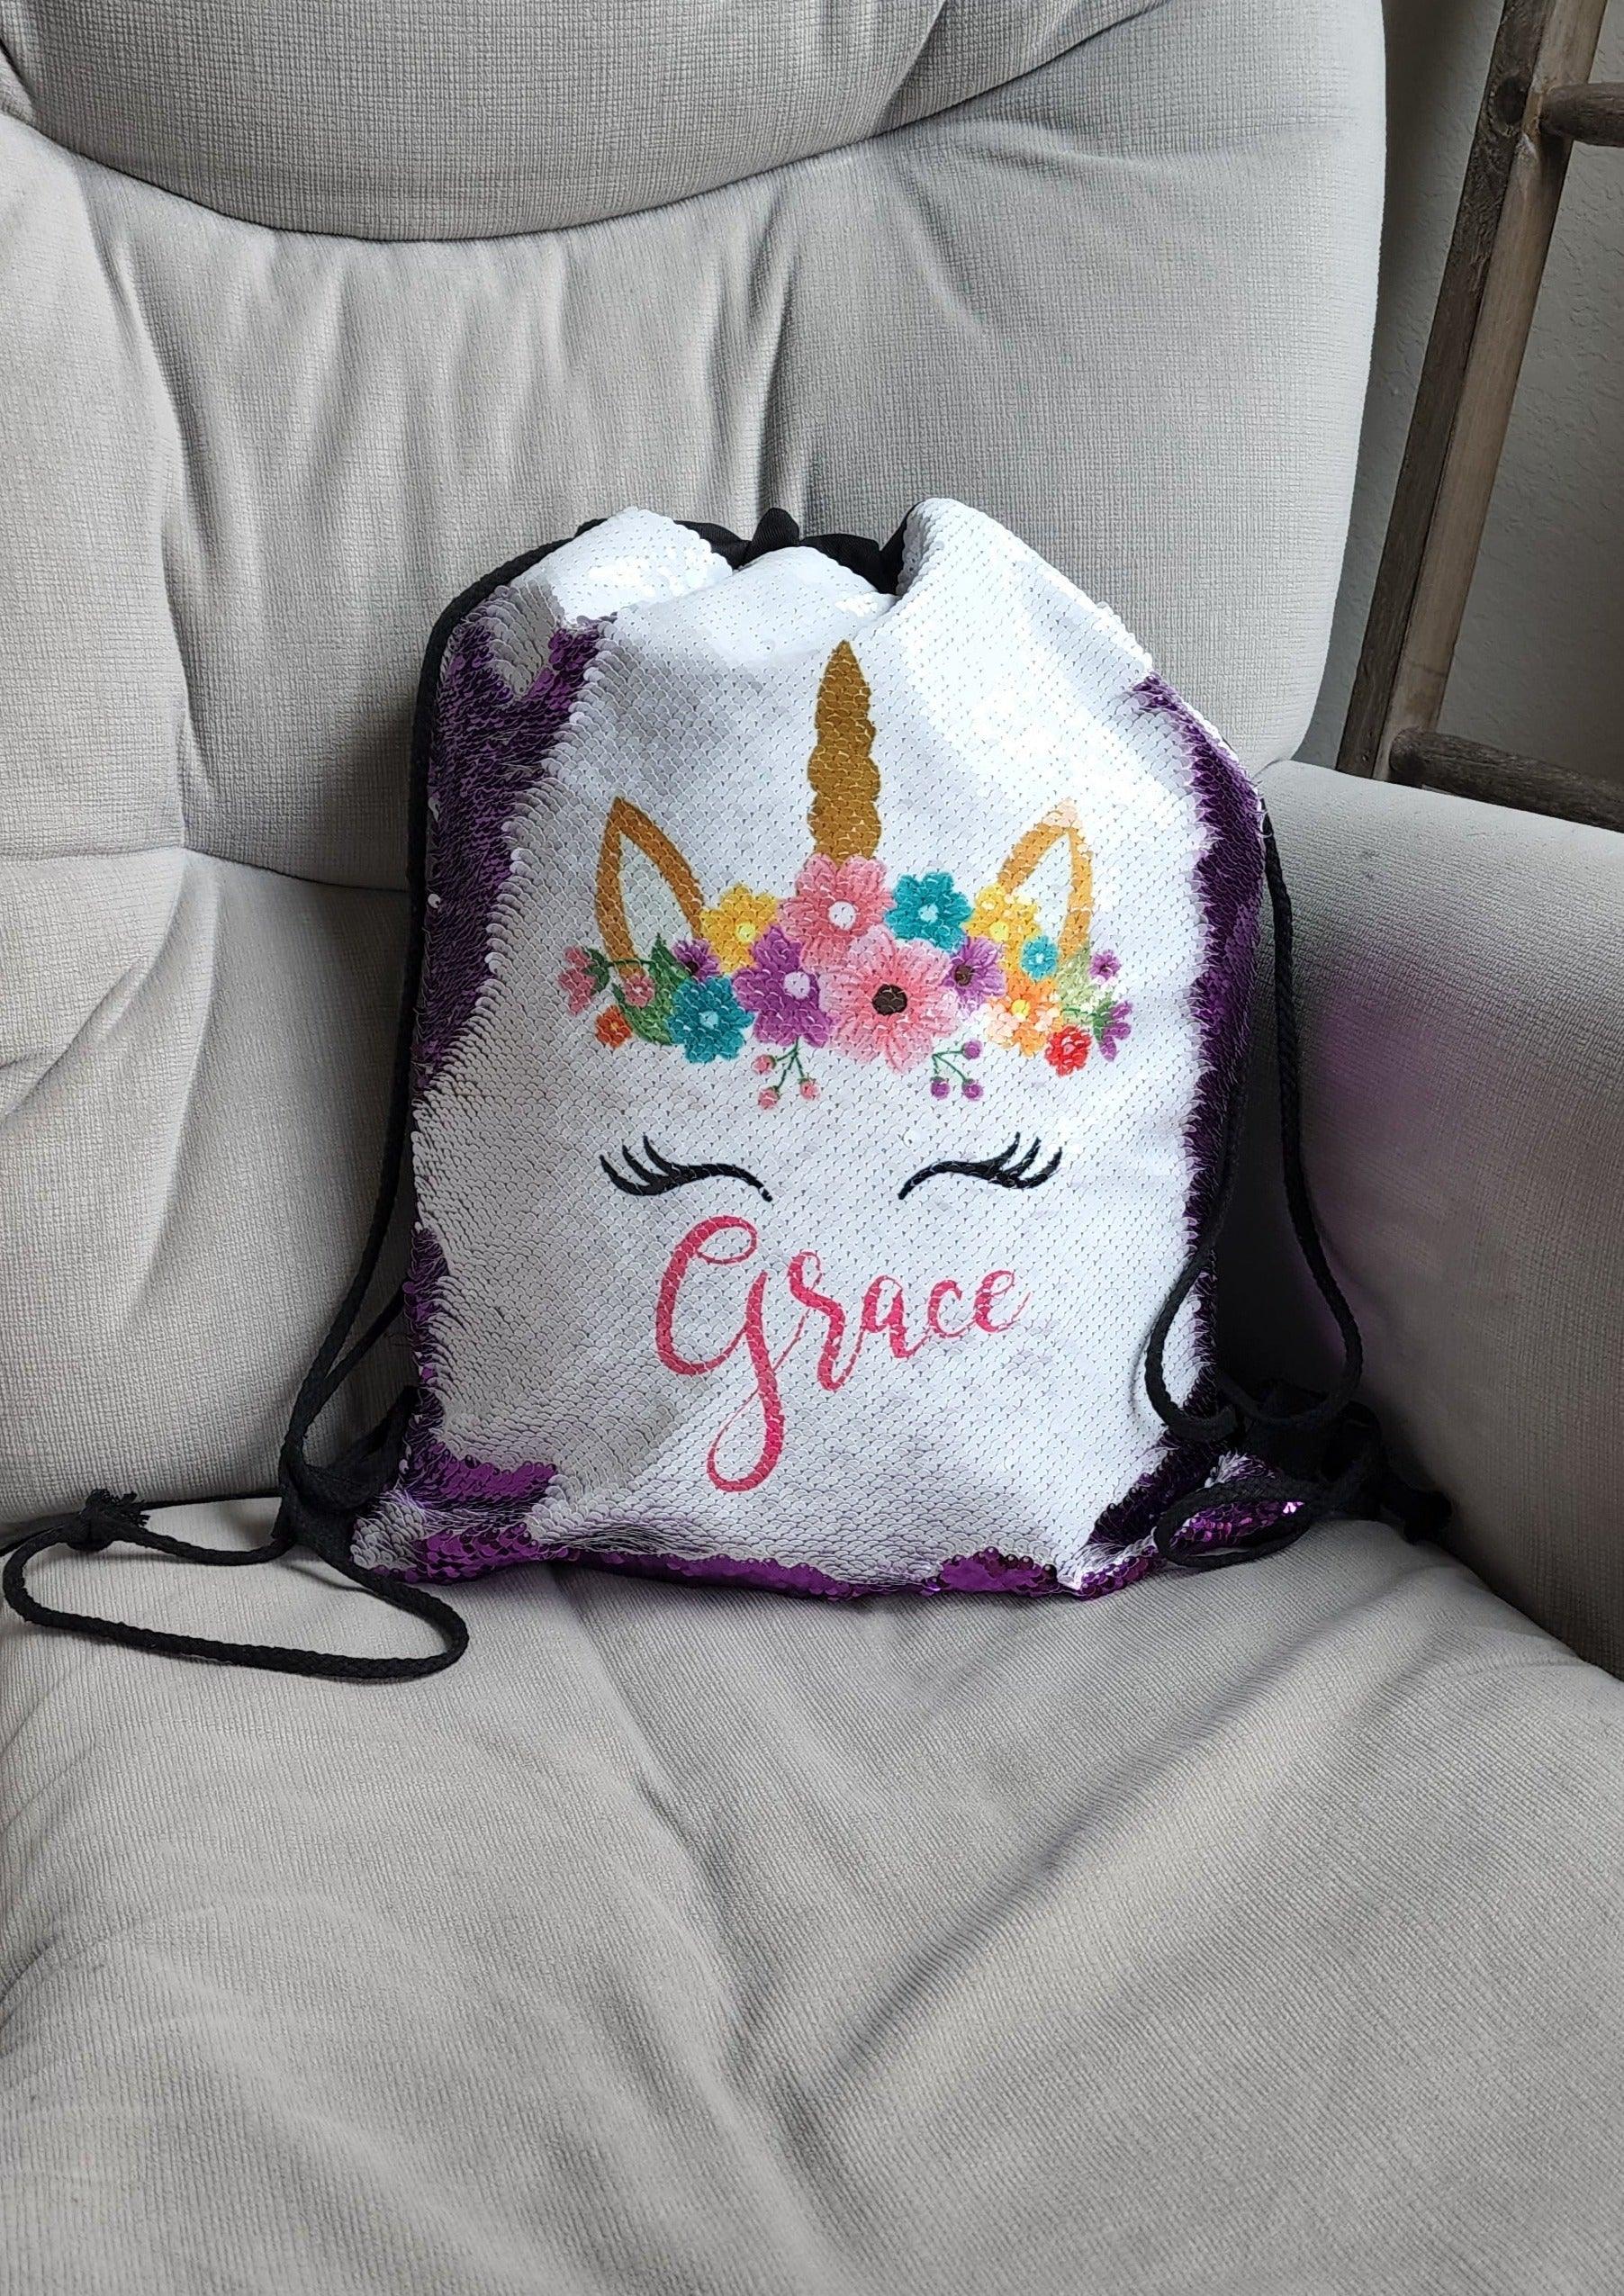 www.rejoiceincreation.com This personalized Unicorn bag makes a great gift for any girl who loves Unicorns. It can be used for the baby, toddler or child's everyday needs to include hold bottles, diapers, wipes, small toys, small tablet, journal, library books etc. It is also useful to hold extra pair of clothes, water bottle and snacks for gymnastics, ballet or dance practice.